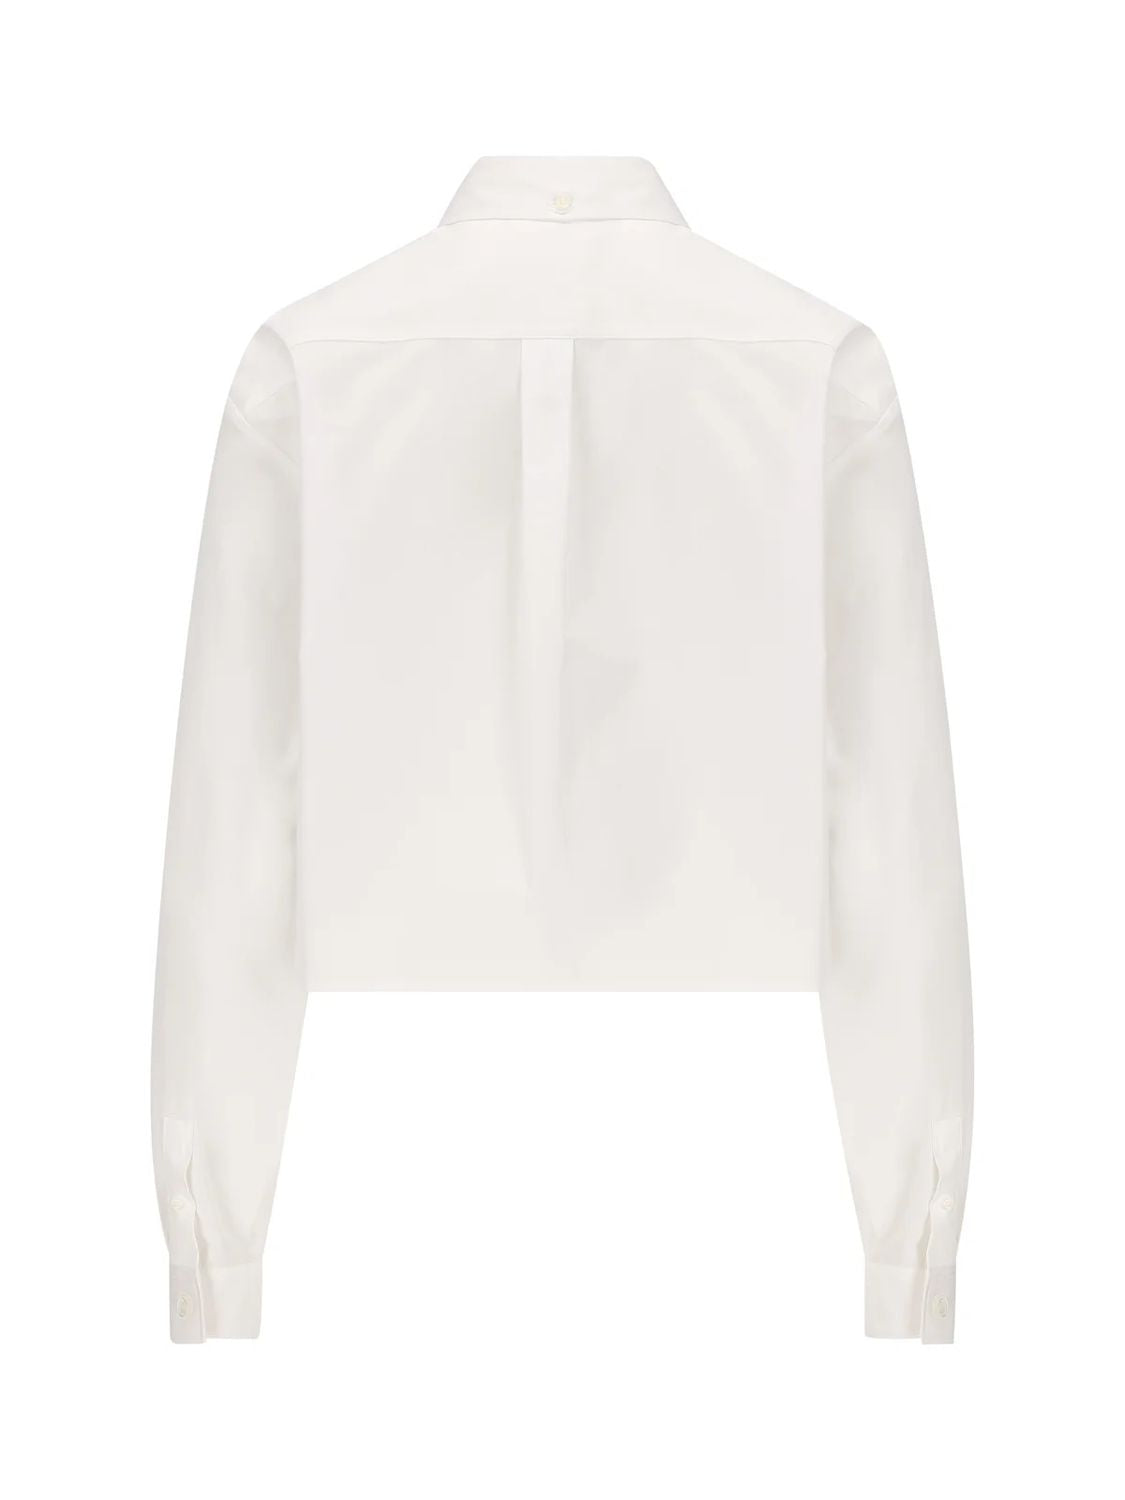 GIVENCHY White Cropped Button-Down Collar Cotton Shirt for Women